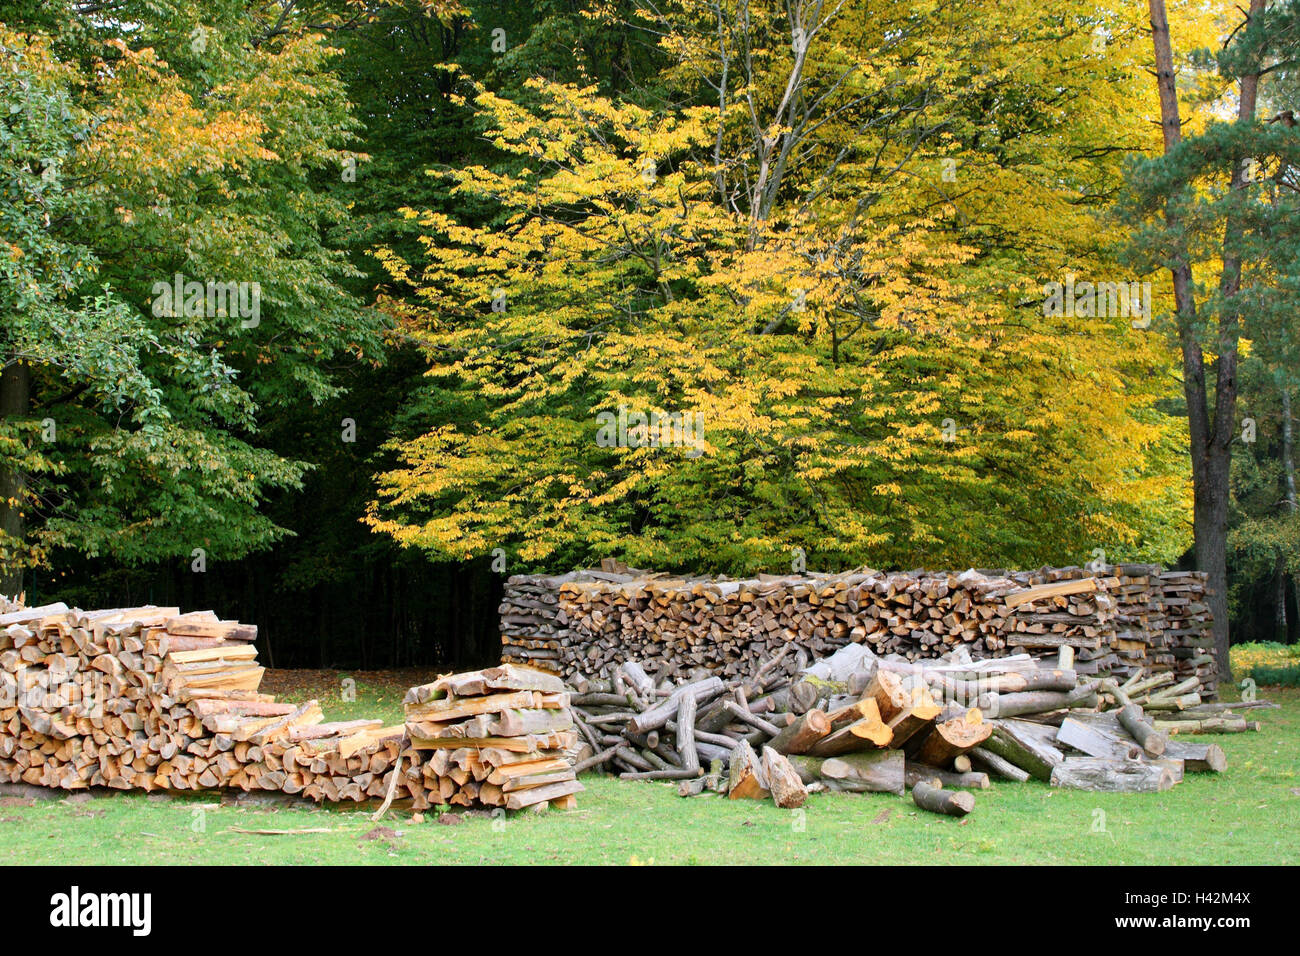 Wood, pile of wood, autumn, edge of the forest, forestry, forest economy, pile of wood, trees, Stock Photo